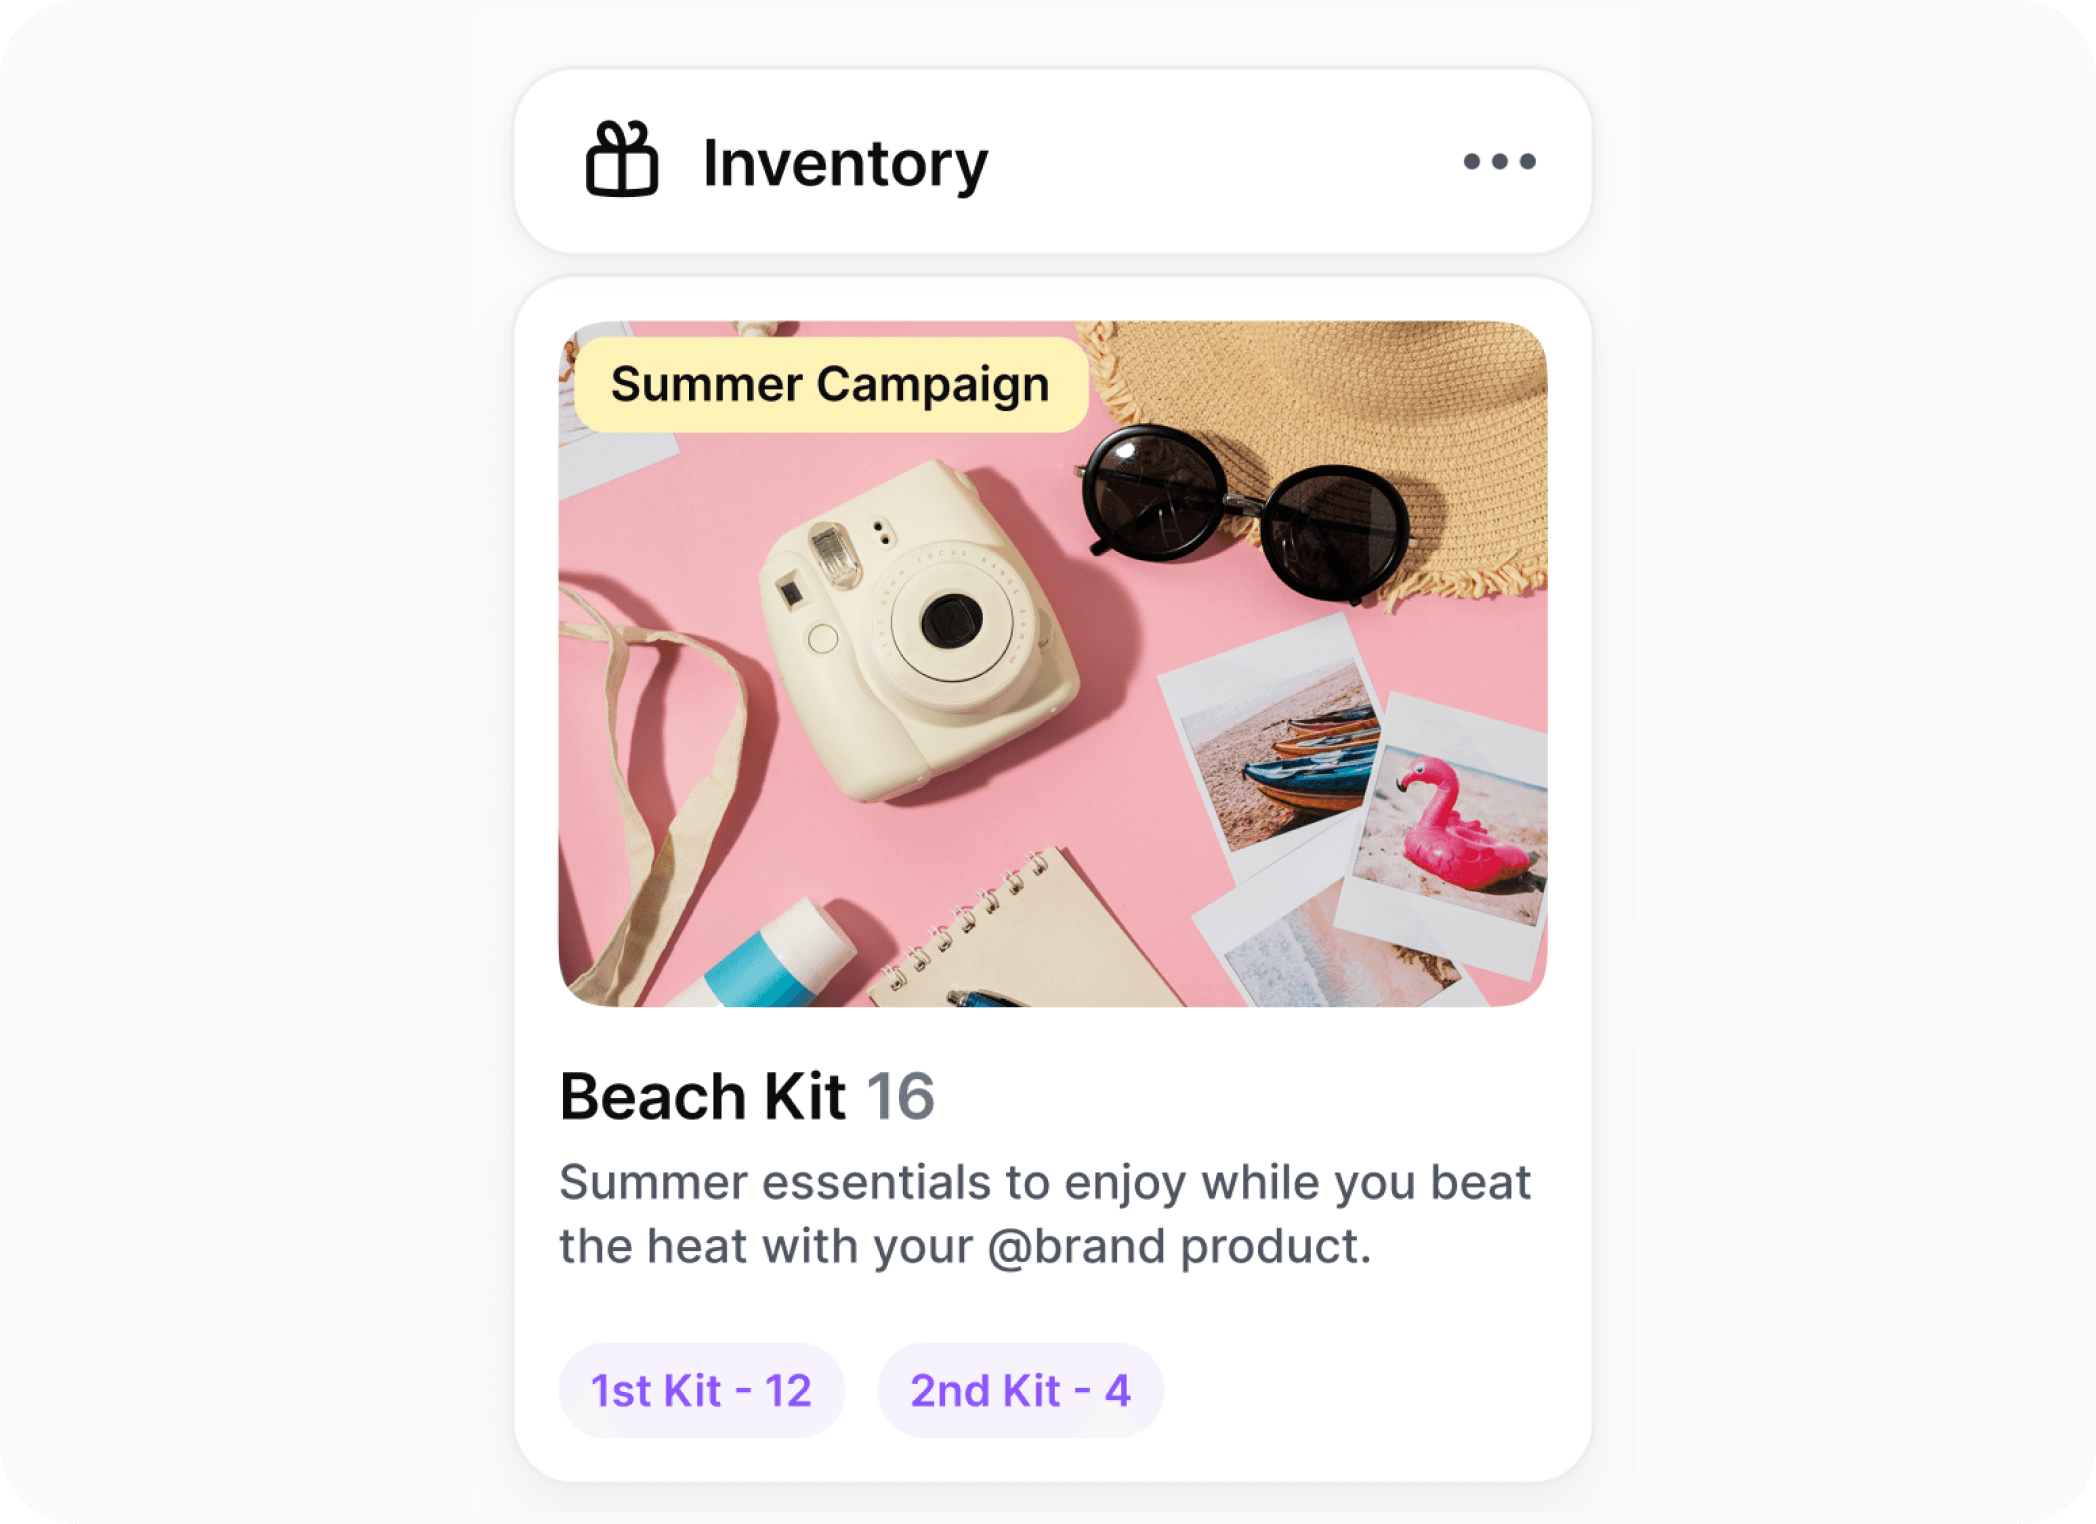 Partner with us through Foooji Doorstep for creative concepting, sourcing, and purchasing. And if it’s custom kits you need, we’ll pack them in-house for quality control.